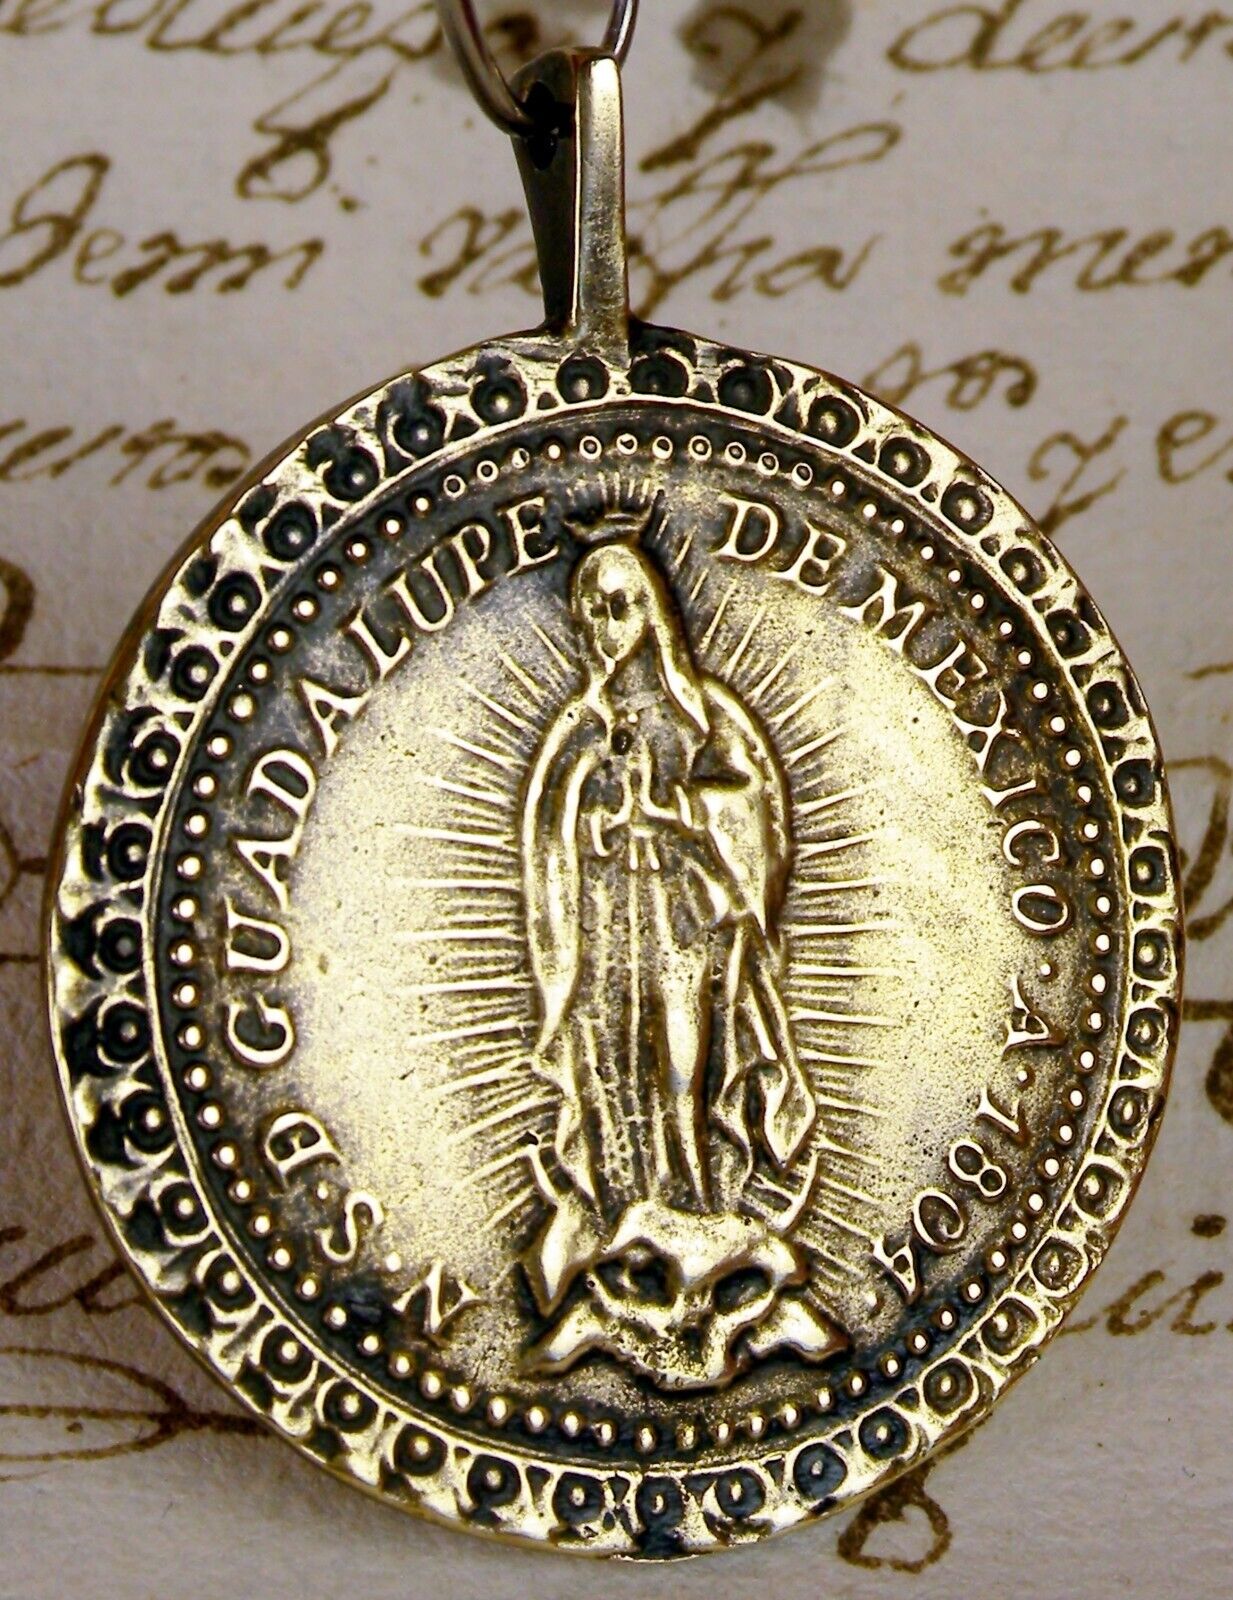 ANTIQUE DATED 1804 GUADALUPE MEXICO SHRINE PILGRIMAGE BRONZE ROSARY MEDAL